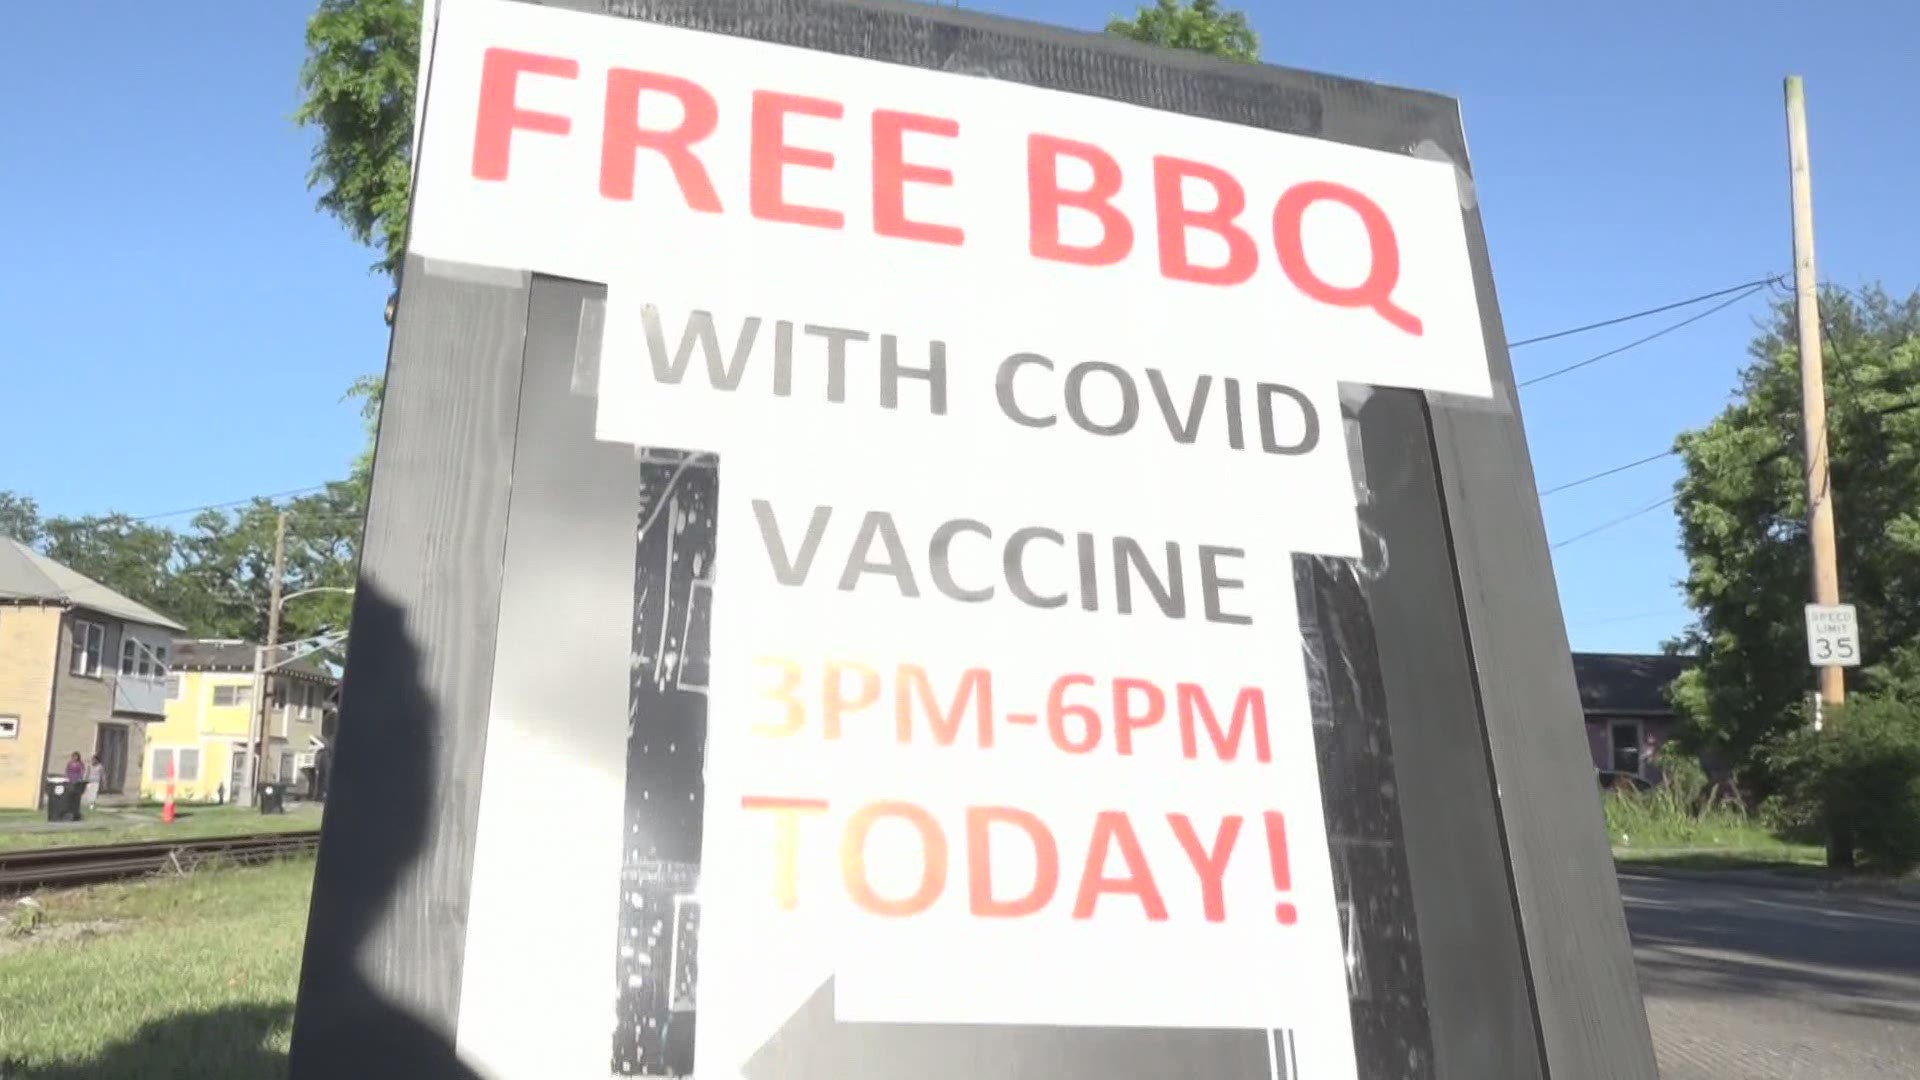 A vaccination event in the lower ninth ward made it possible for residents young and old to get a shot and a plate of food.